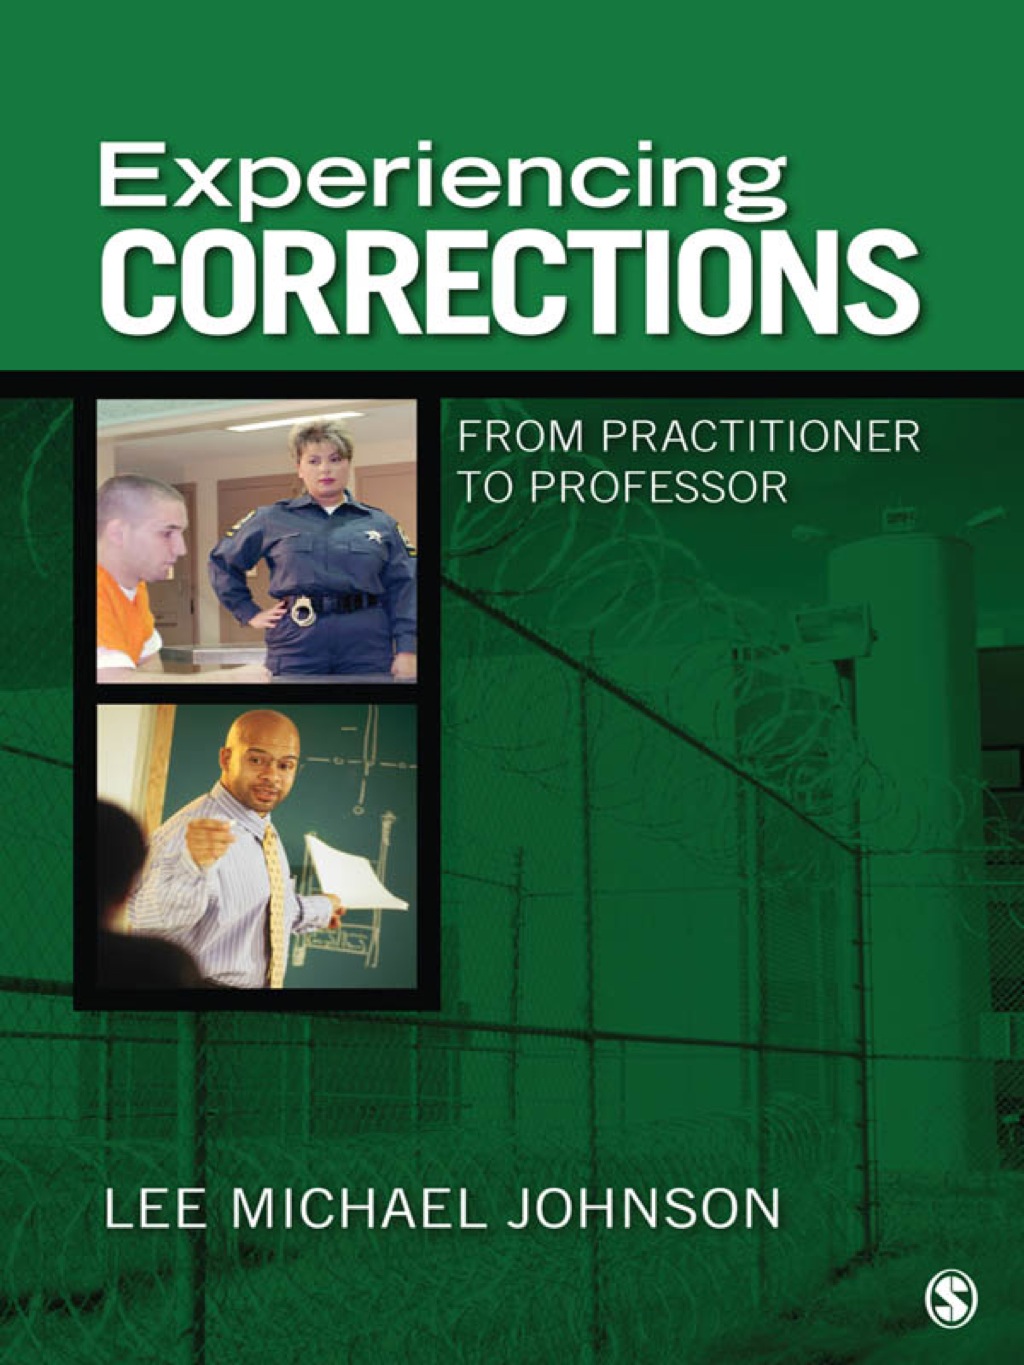 Experiencing Corrections: From Practitioner to Professor (eBook) - Lee Michael Johnson